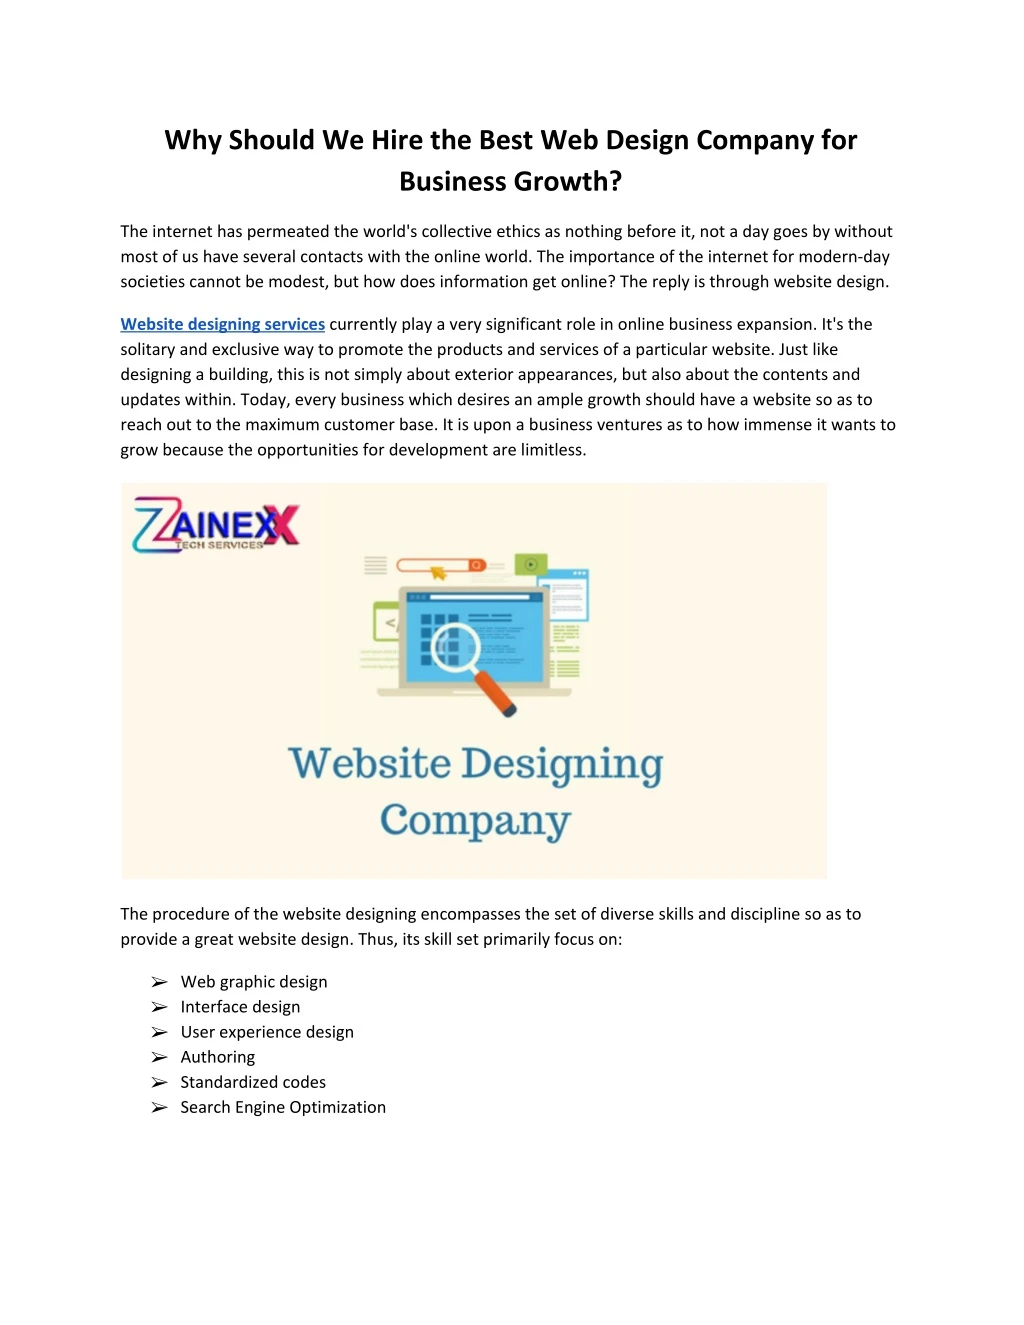 why should we hire the best web design company